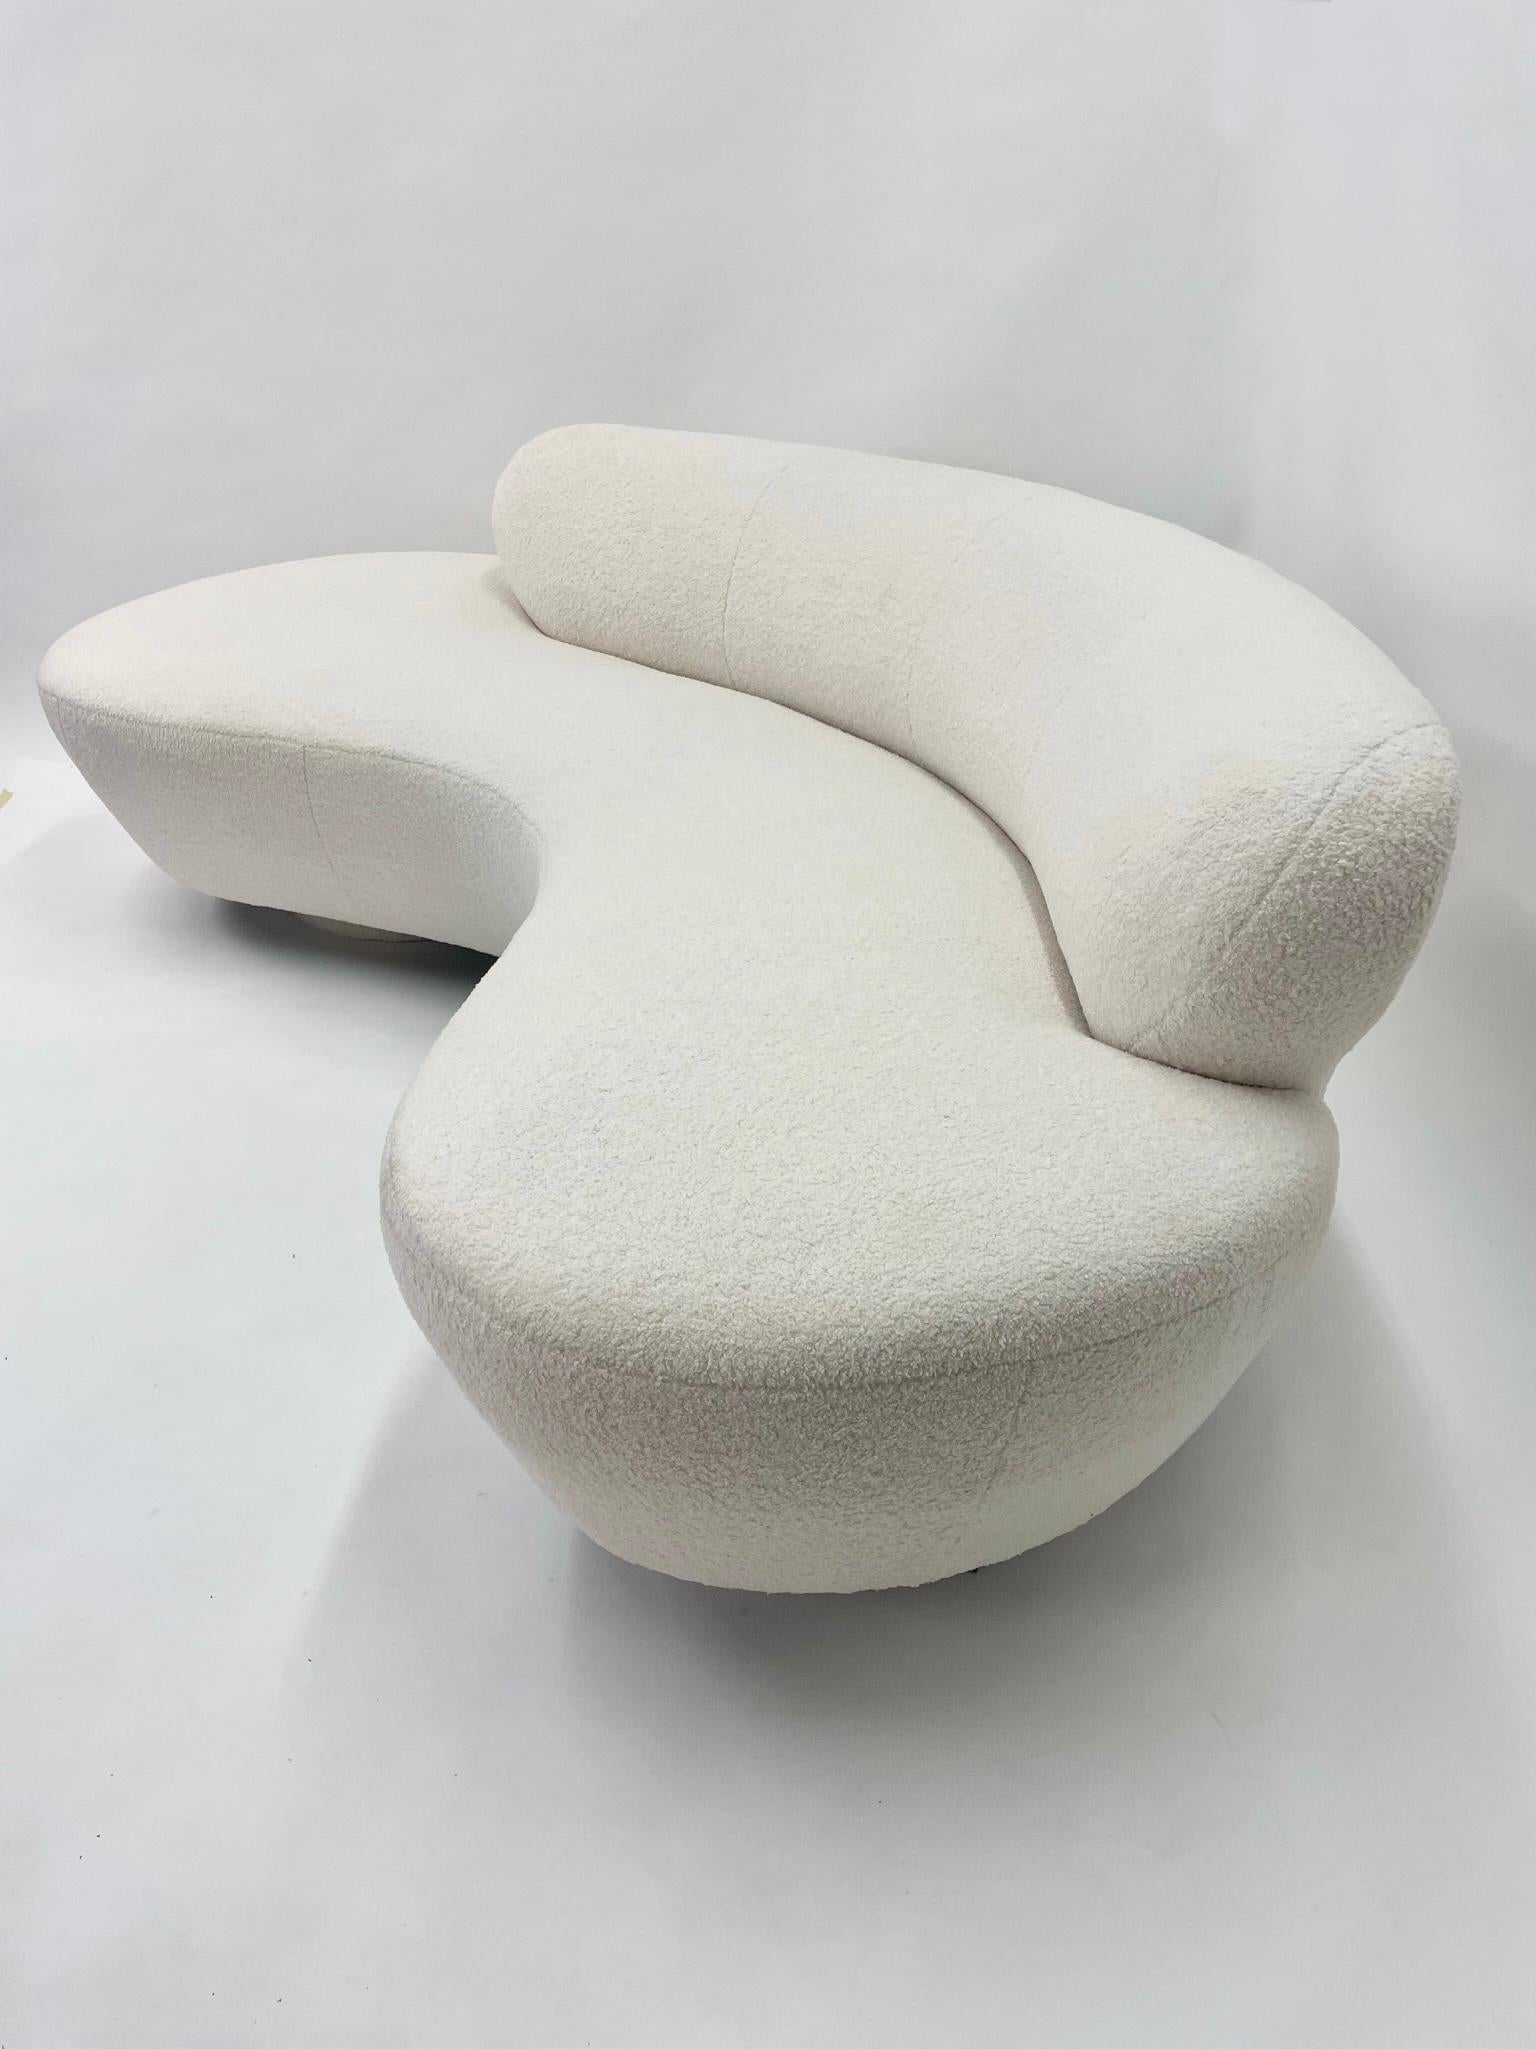 Upholstery Serpentine 'Cloud' Sofa by Vladimir Kagan for Directional